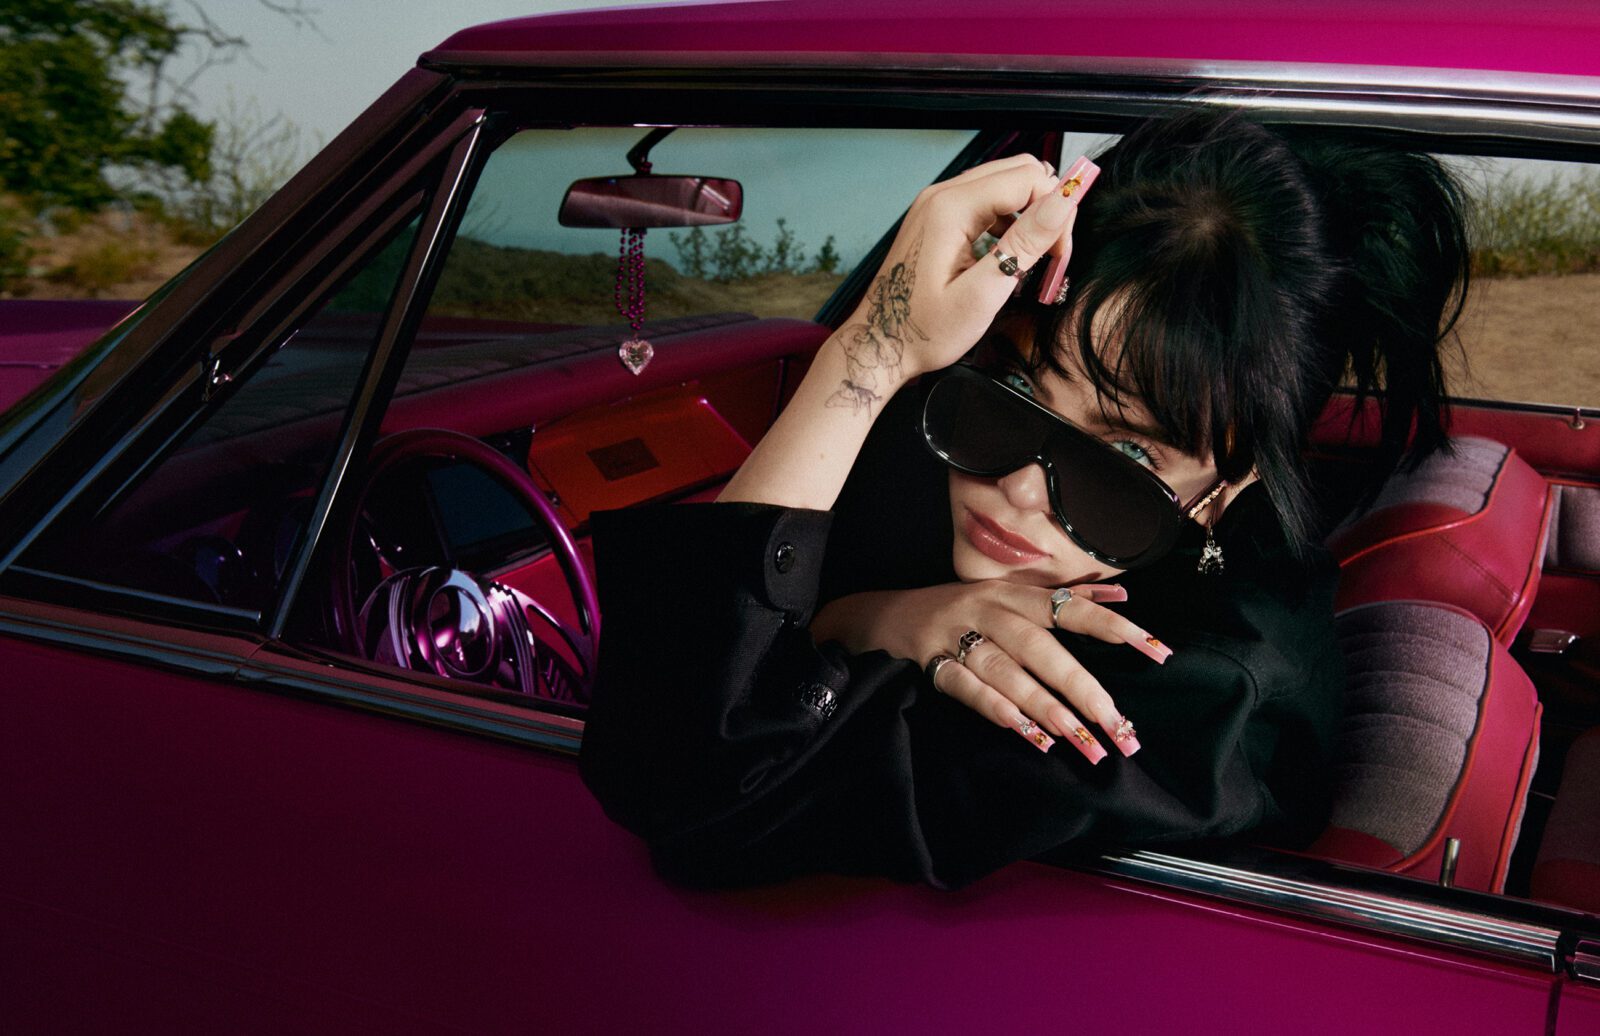 Gucci Introduces Hollywood Forever Eyewear Collection and